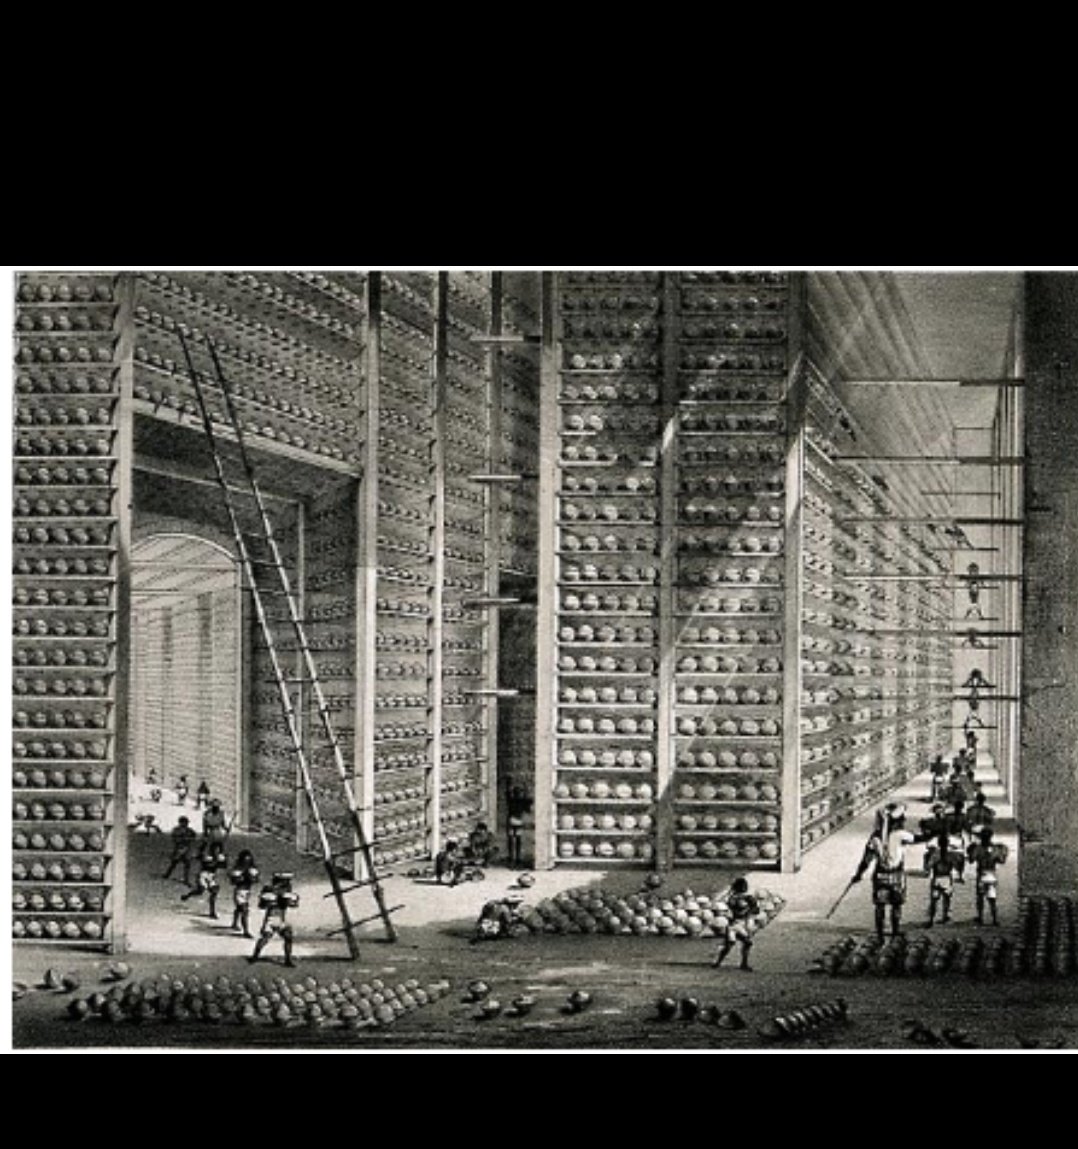 The picture below is of a Sassoon Opium warehouse in Patna,Bihar . It shows about 13,000,000 Pounds of Opium.